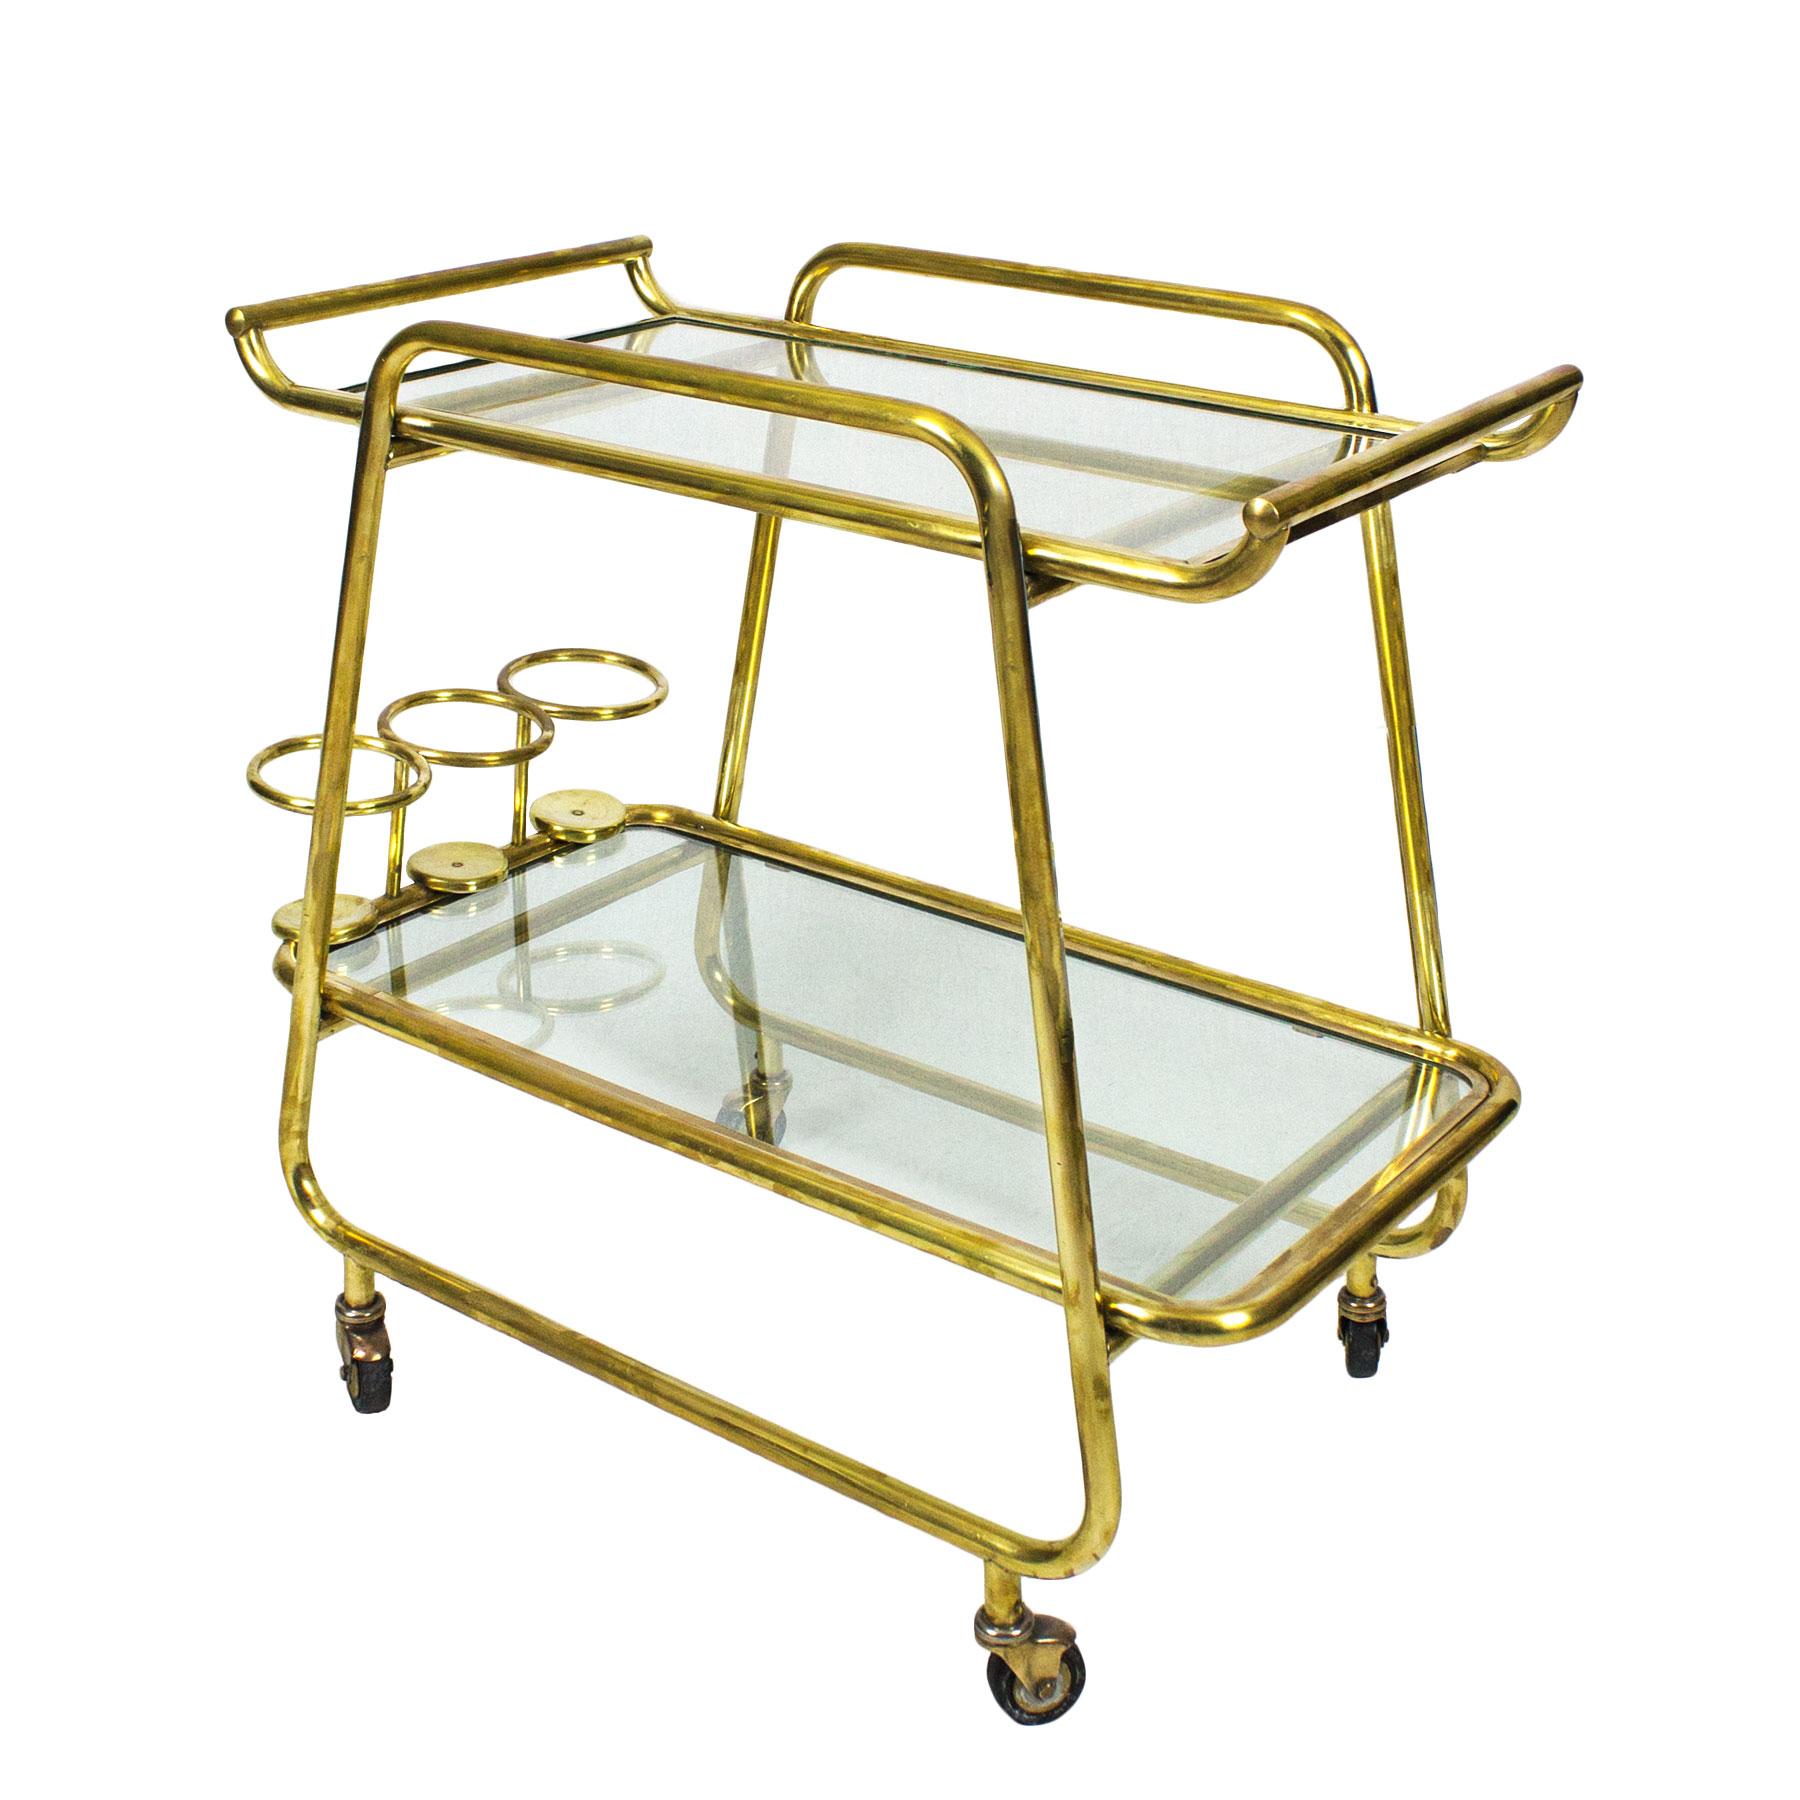 Art Deco bar cart, polished brass and glass, three bottles rack at the bottom. Originals wheels. Excellent condition and quality.

Italy, circa 1930.